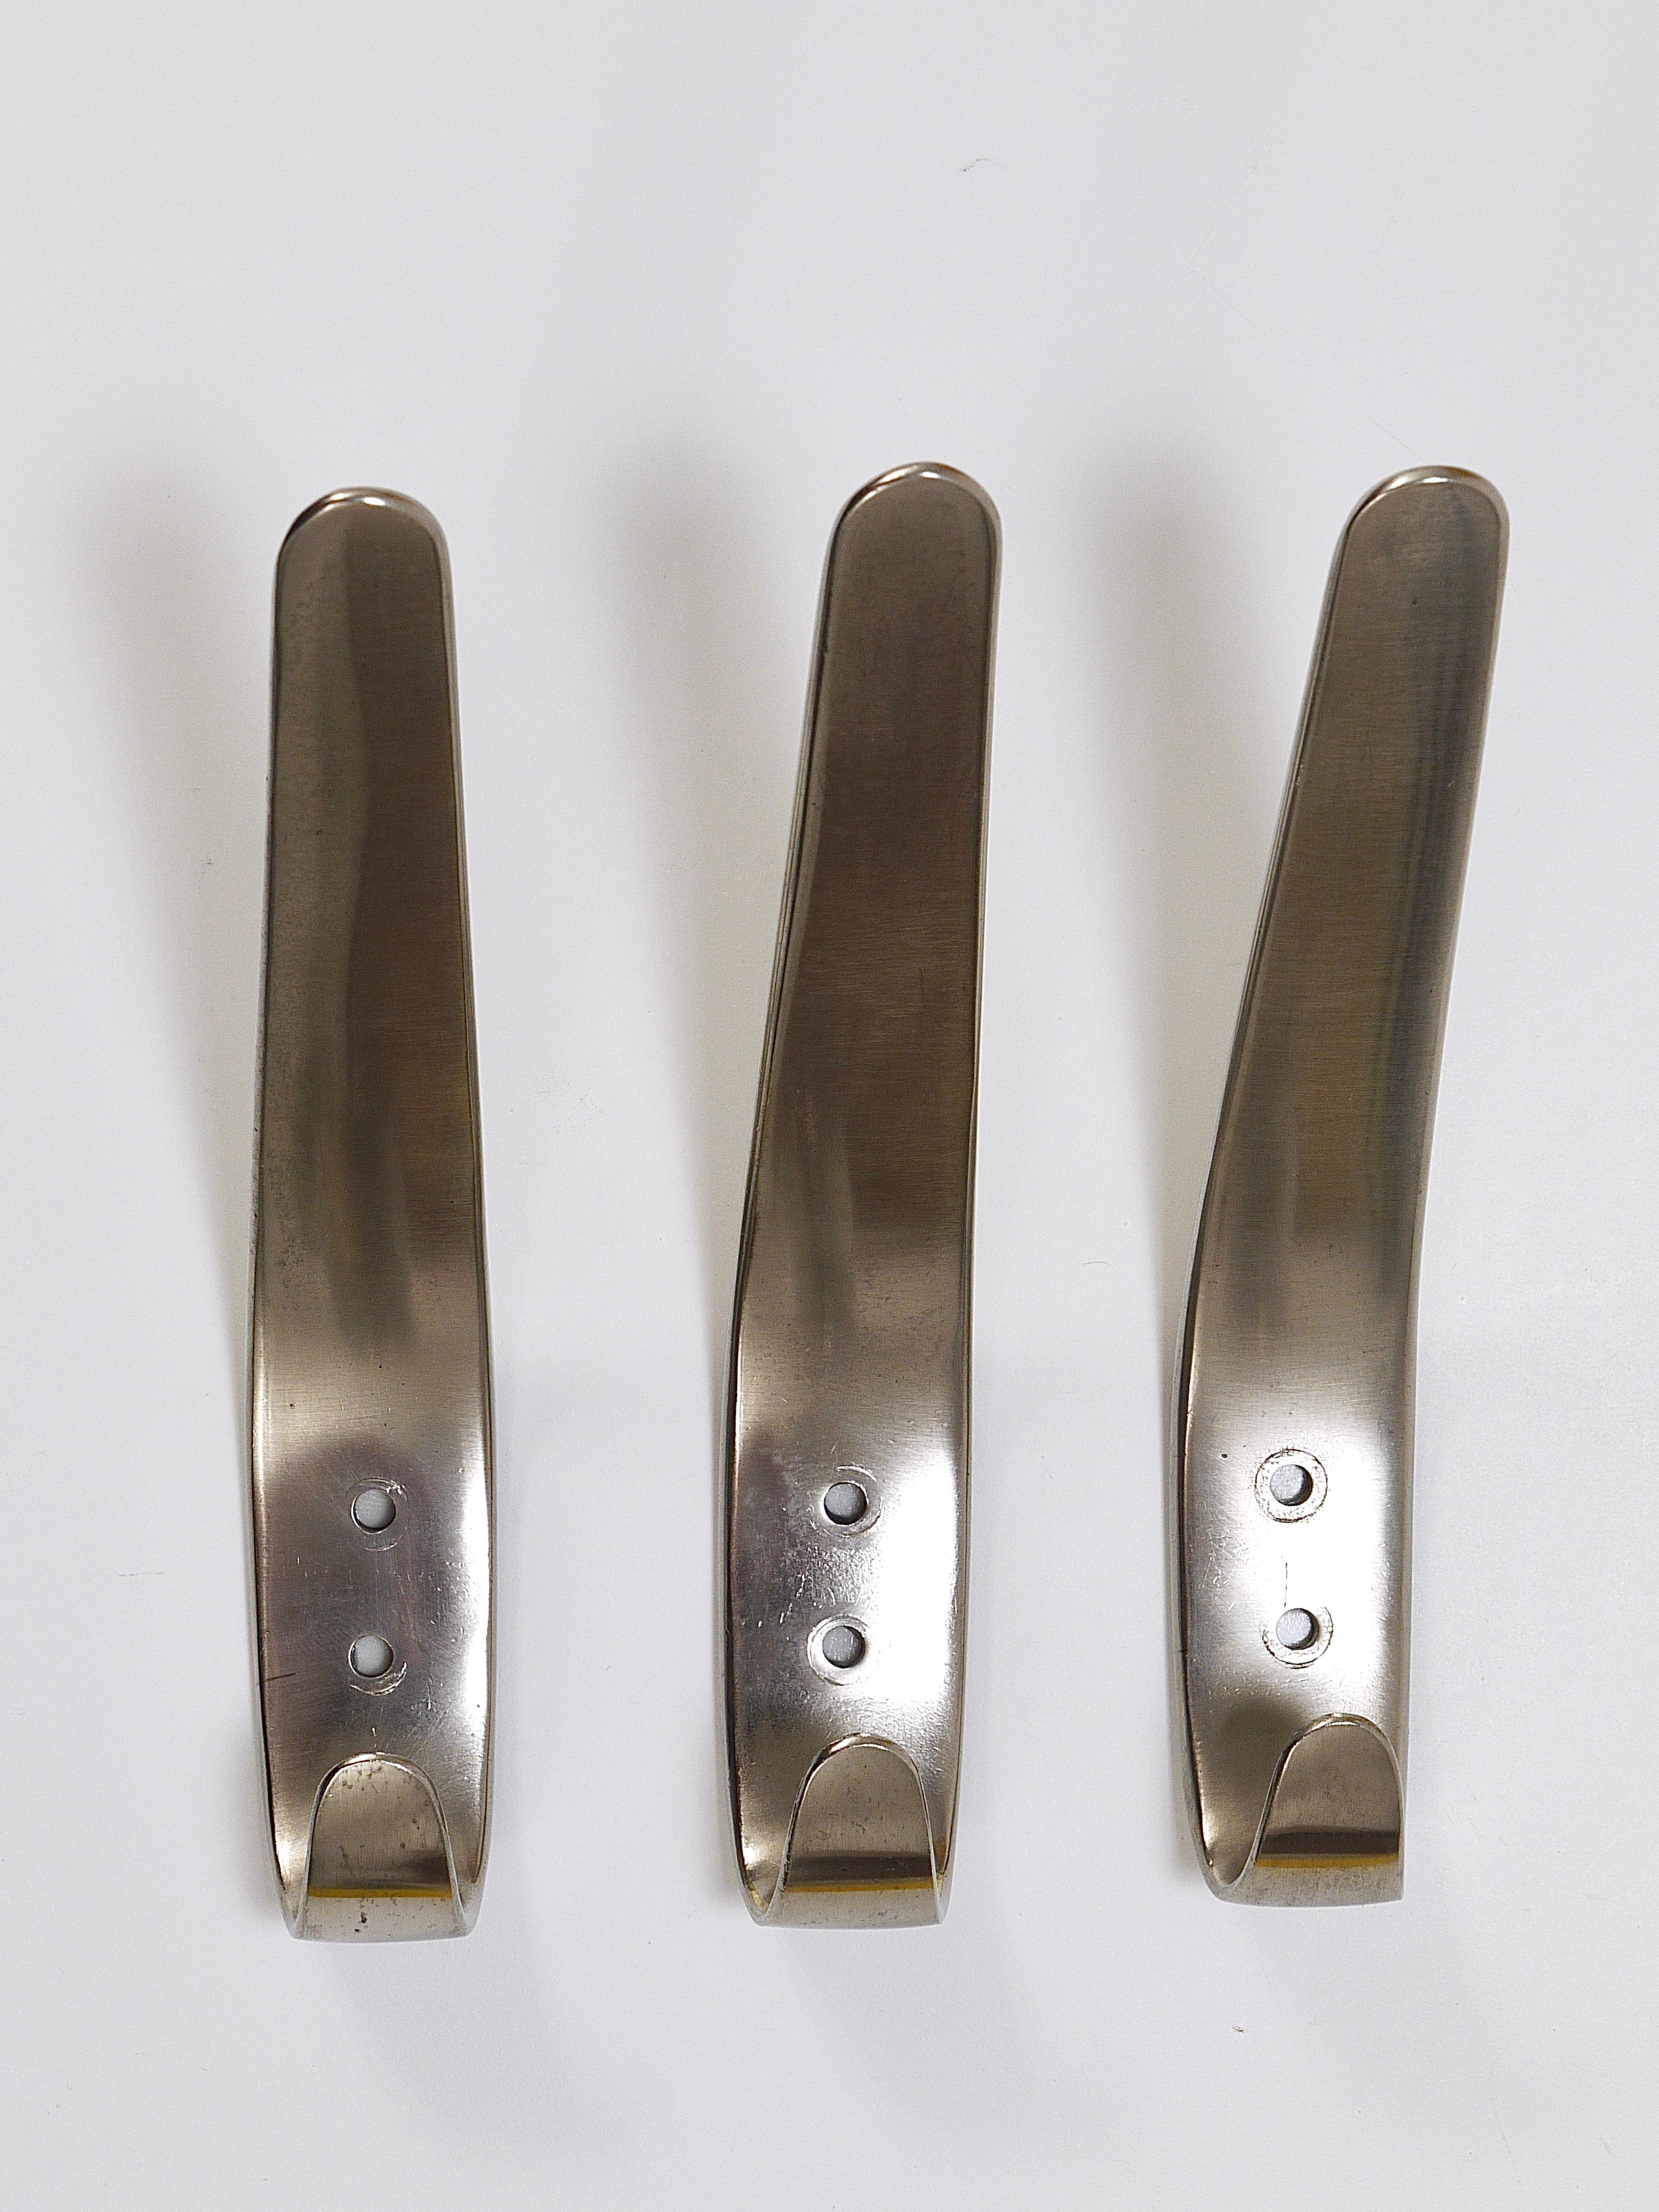 Up to 10 Midcentury brass wall hooks, model 4330, designed and executed in the 1950s by Carl Aubock II in Vienna, Austria. Sold and priced per piece. This is the more unusual nickel-plated version with its beautiful silver/nickel surface. These